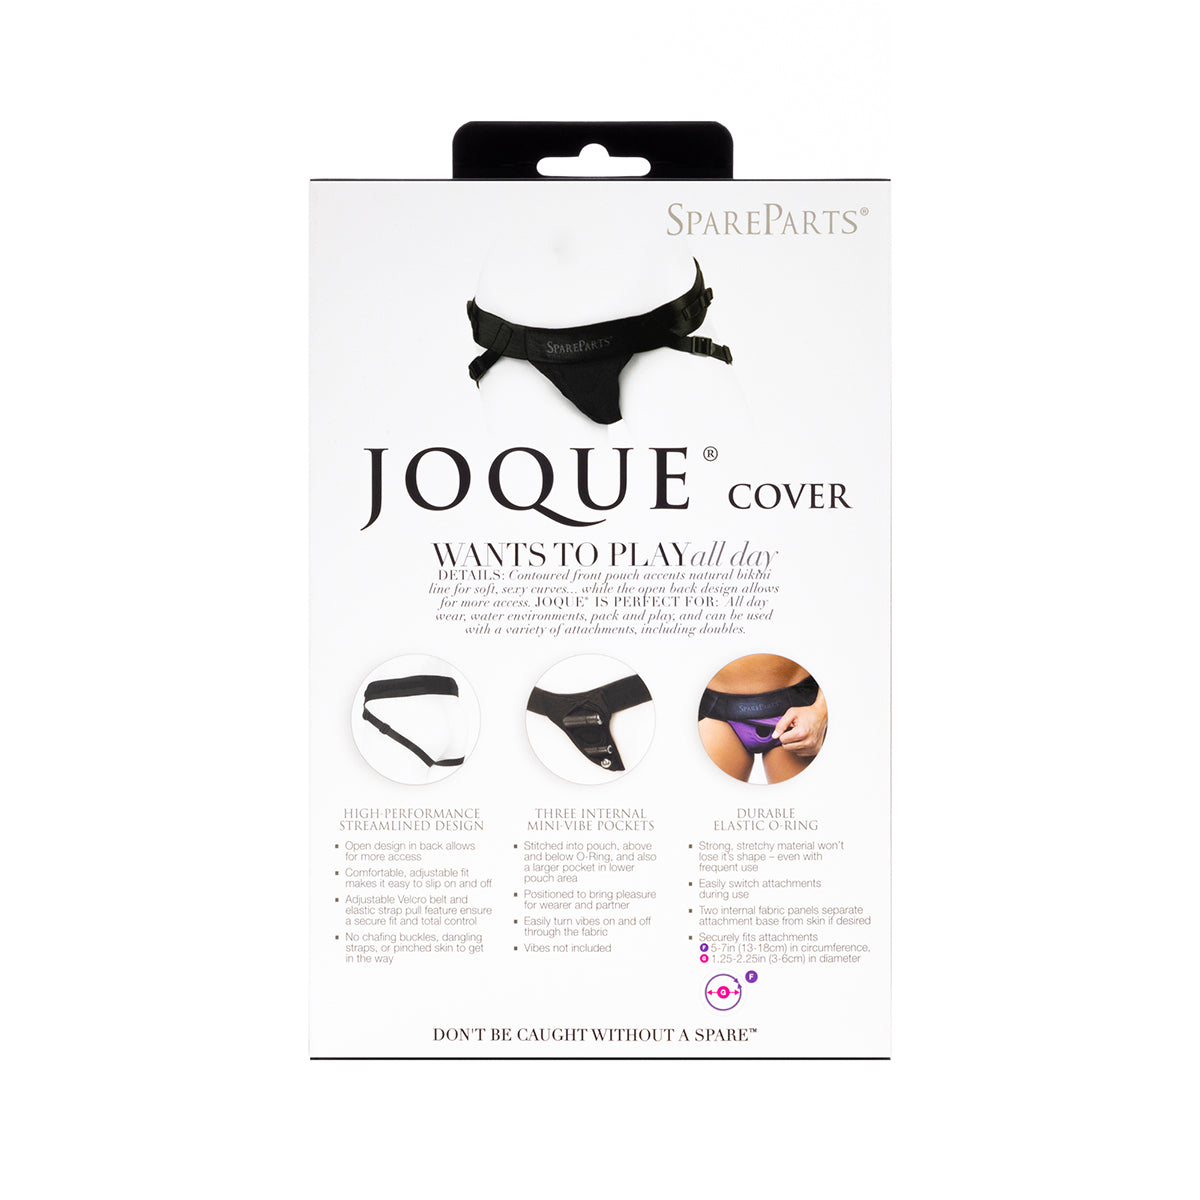 SpareParts Joque Cover Undwr Harness Red (Double Strap) Size A Nylon